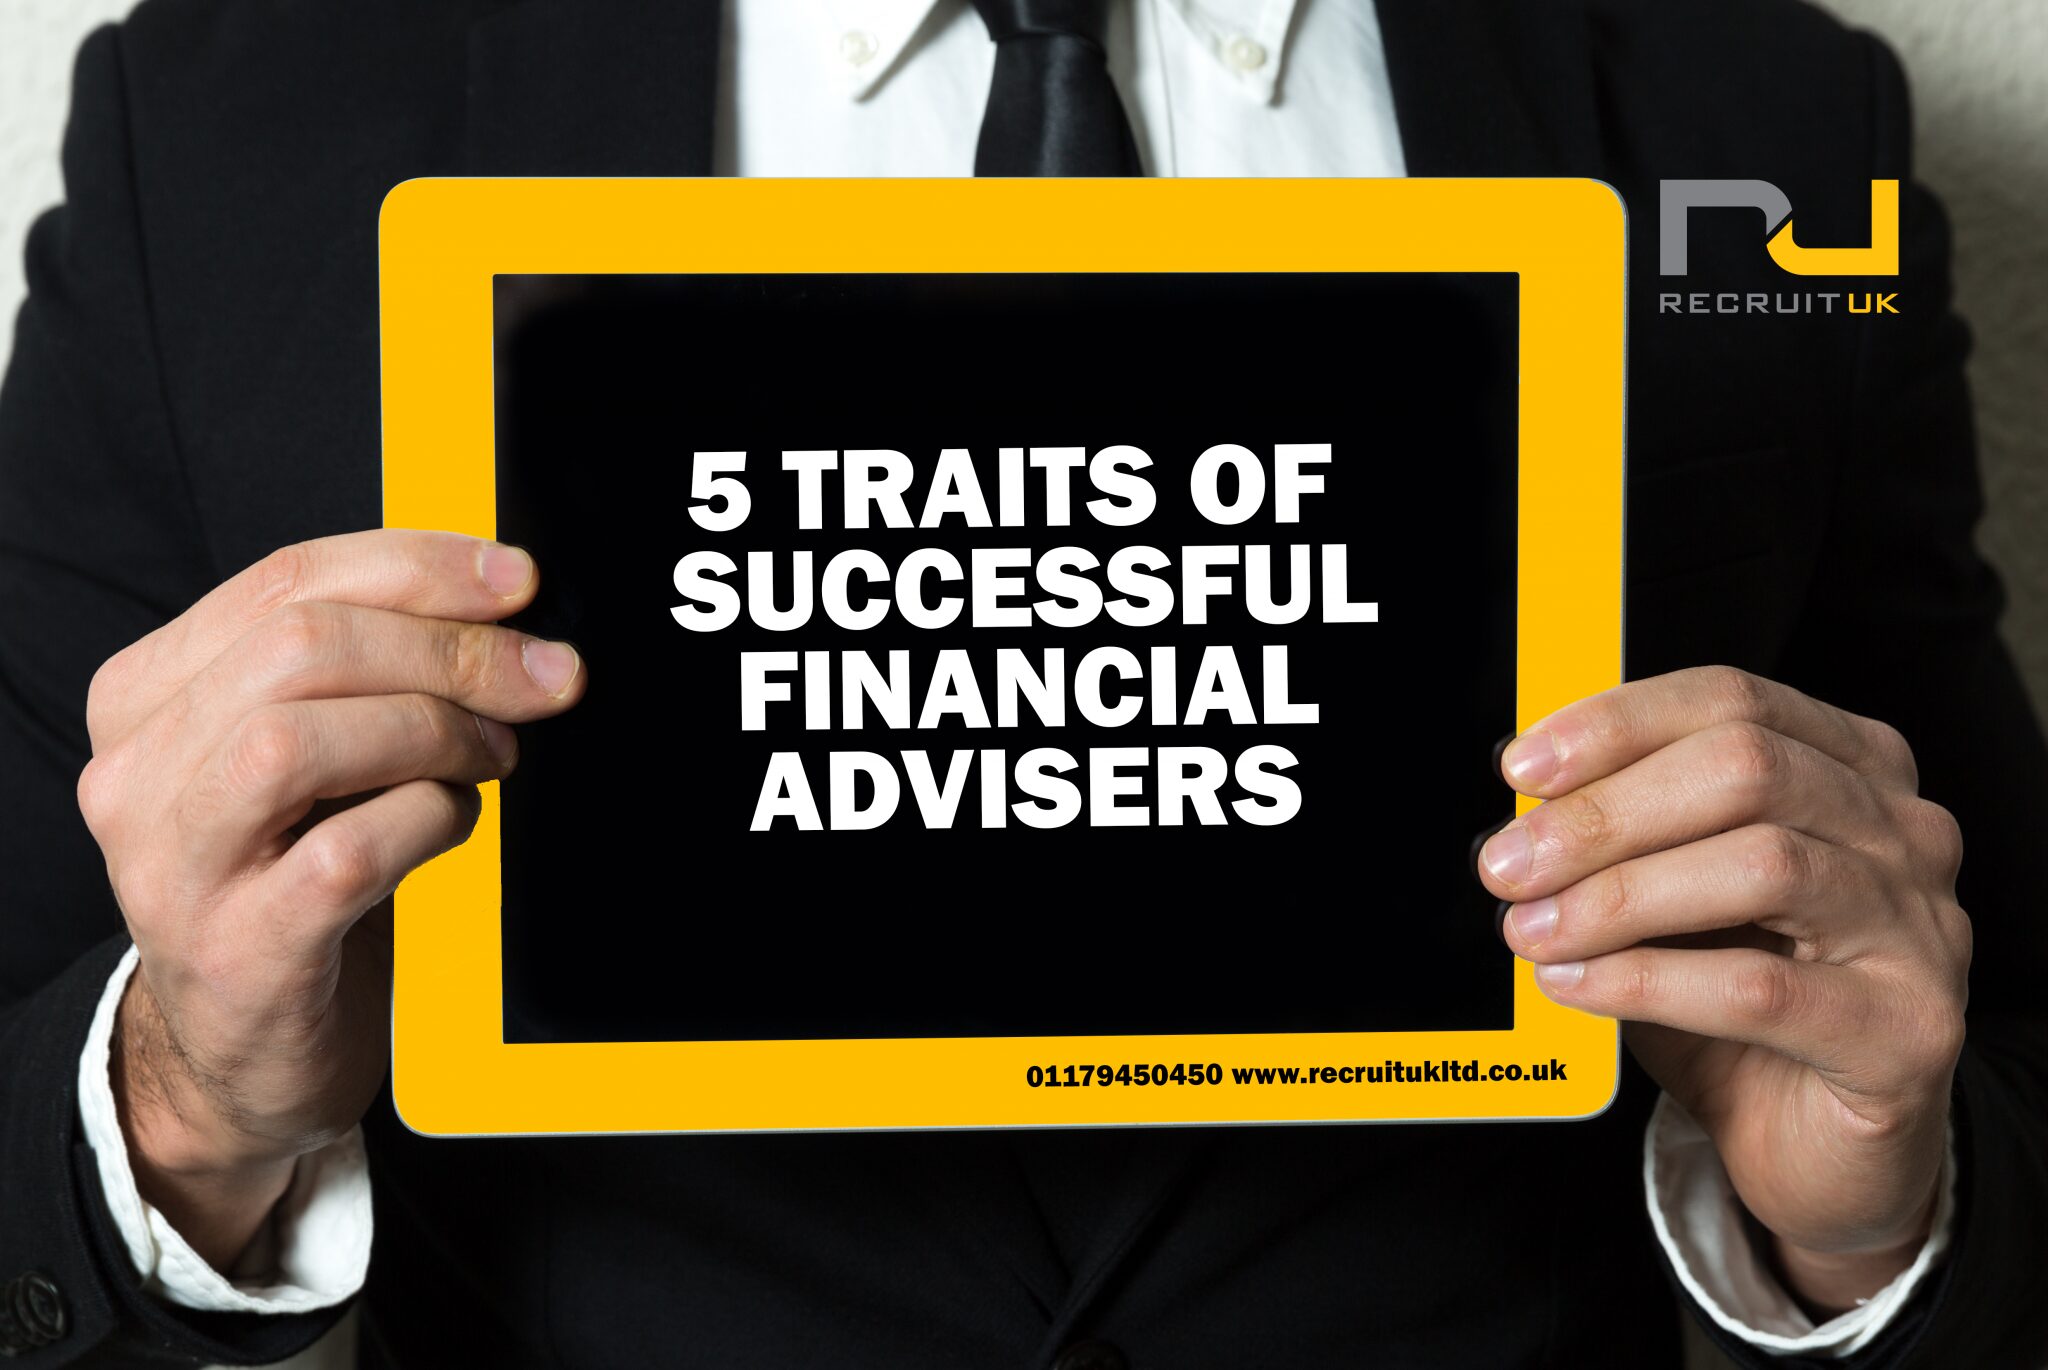 A man holding up a piece of paper stating ' 5 traits of successful financial advisers'